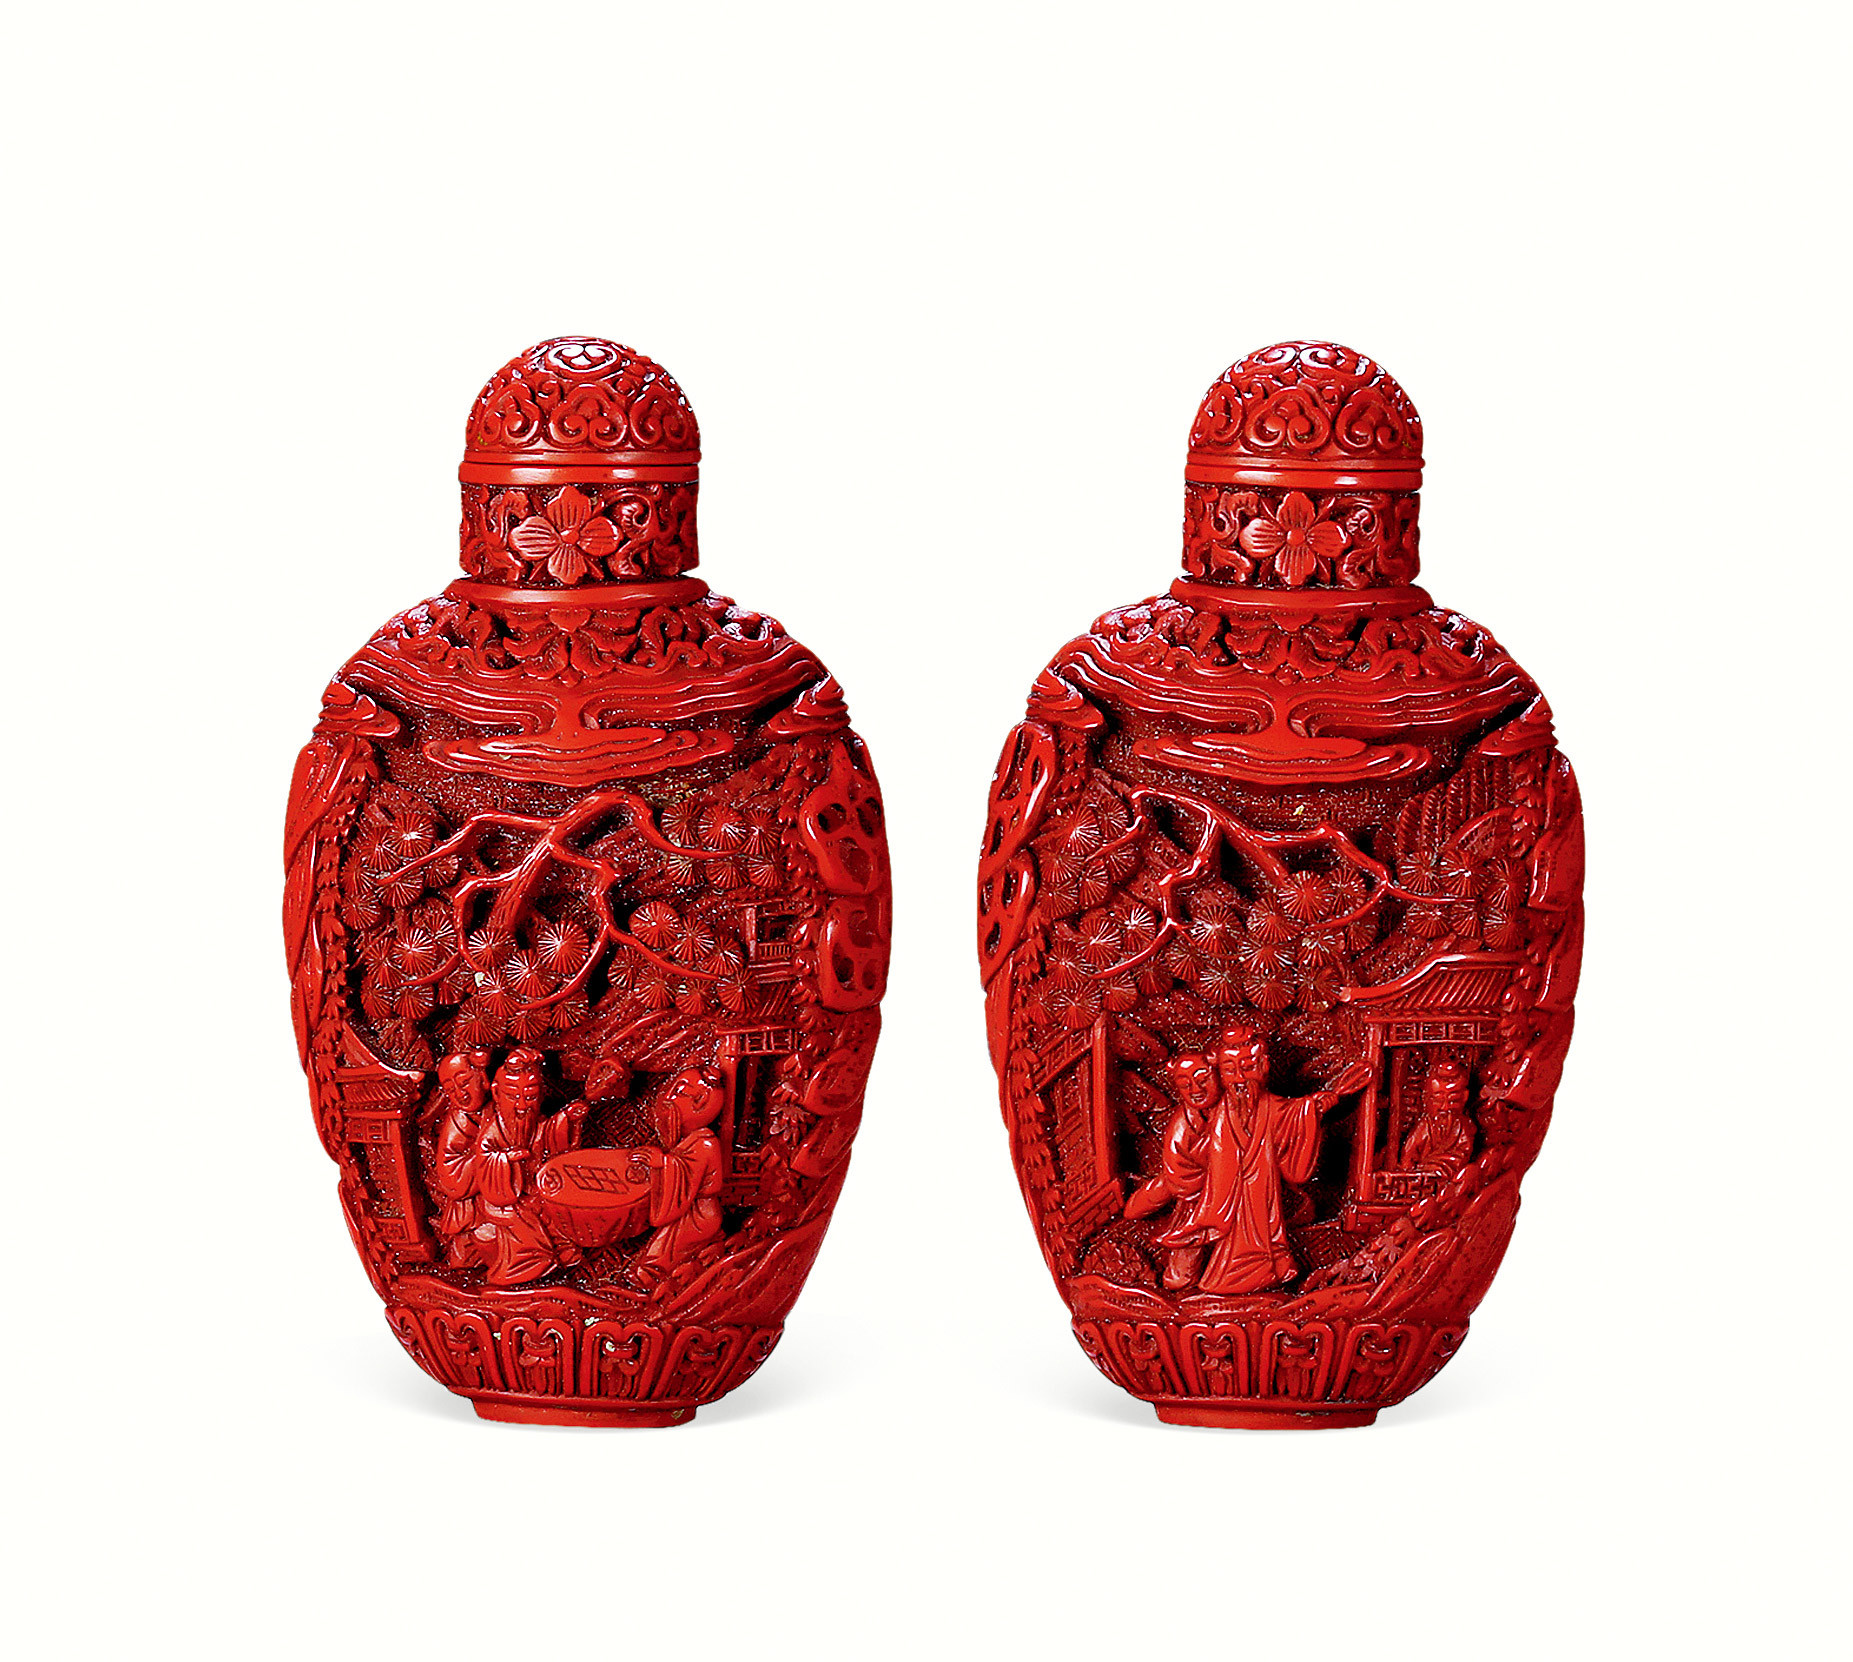 A CARVED LACQUER WARE‘FIGURE’SNUFF BOTTLE